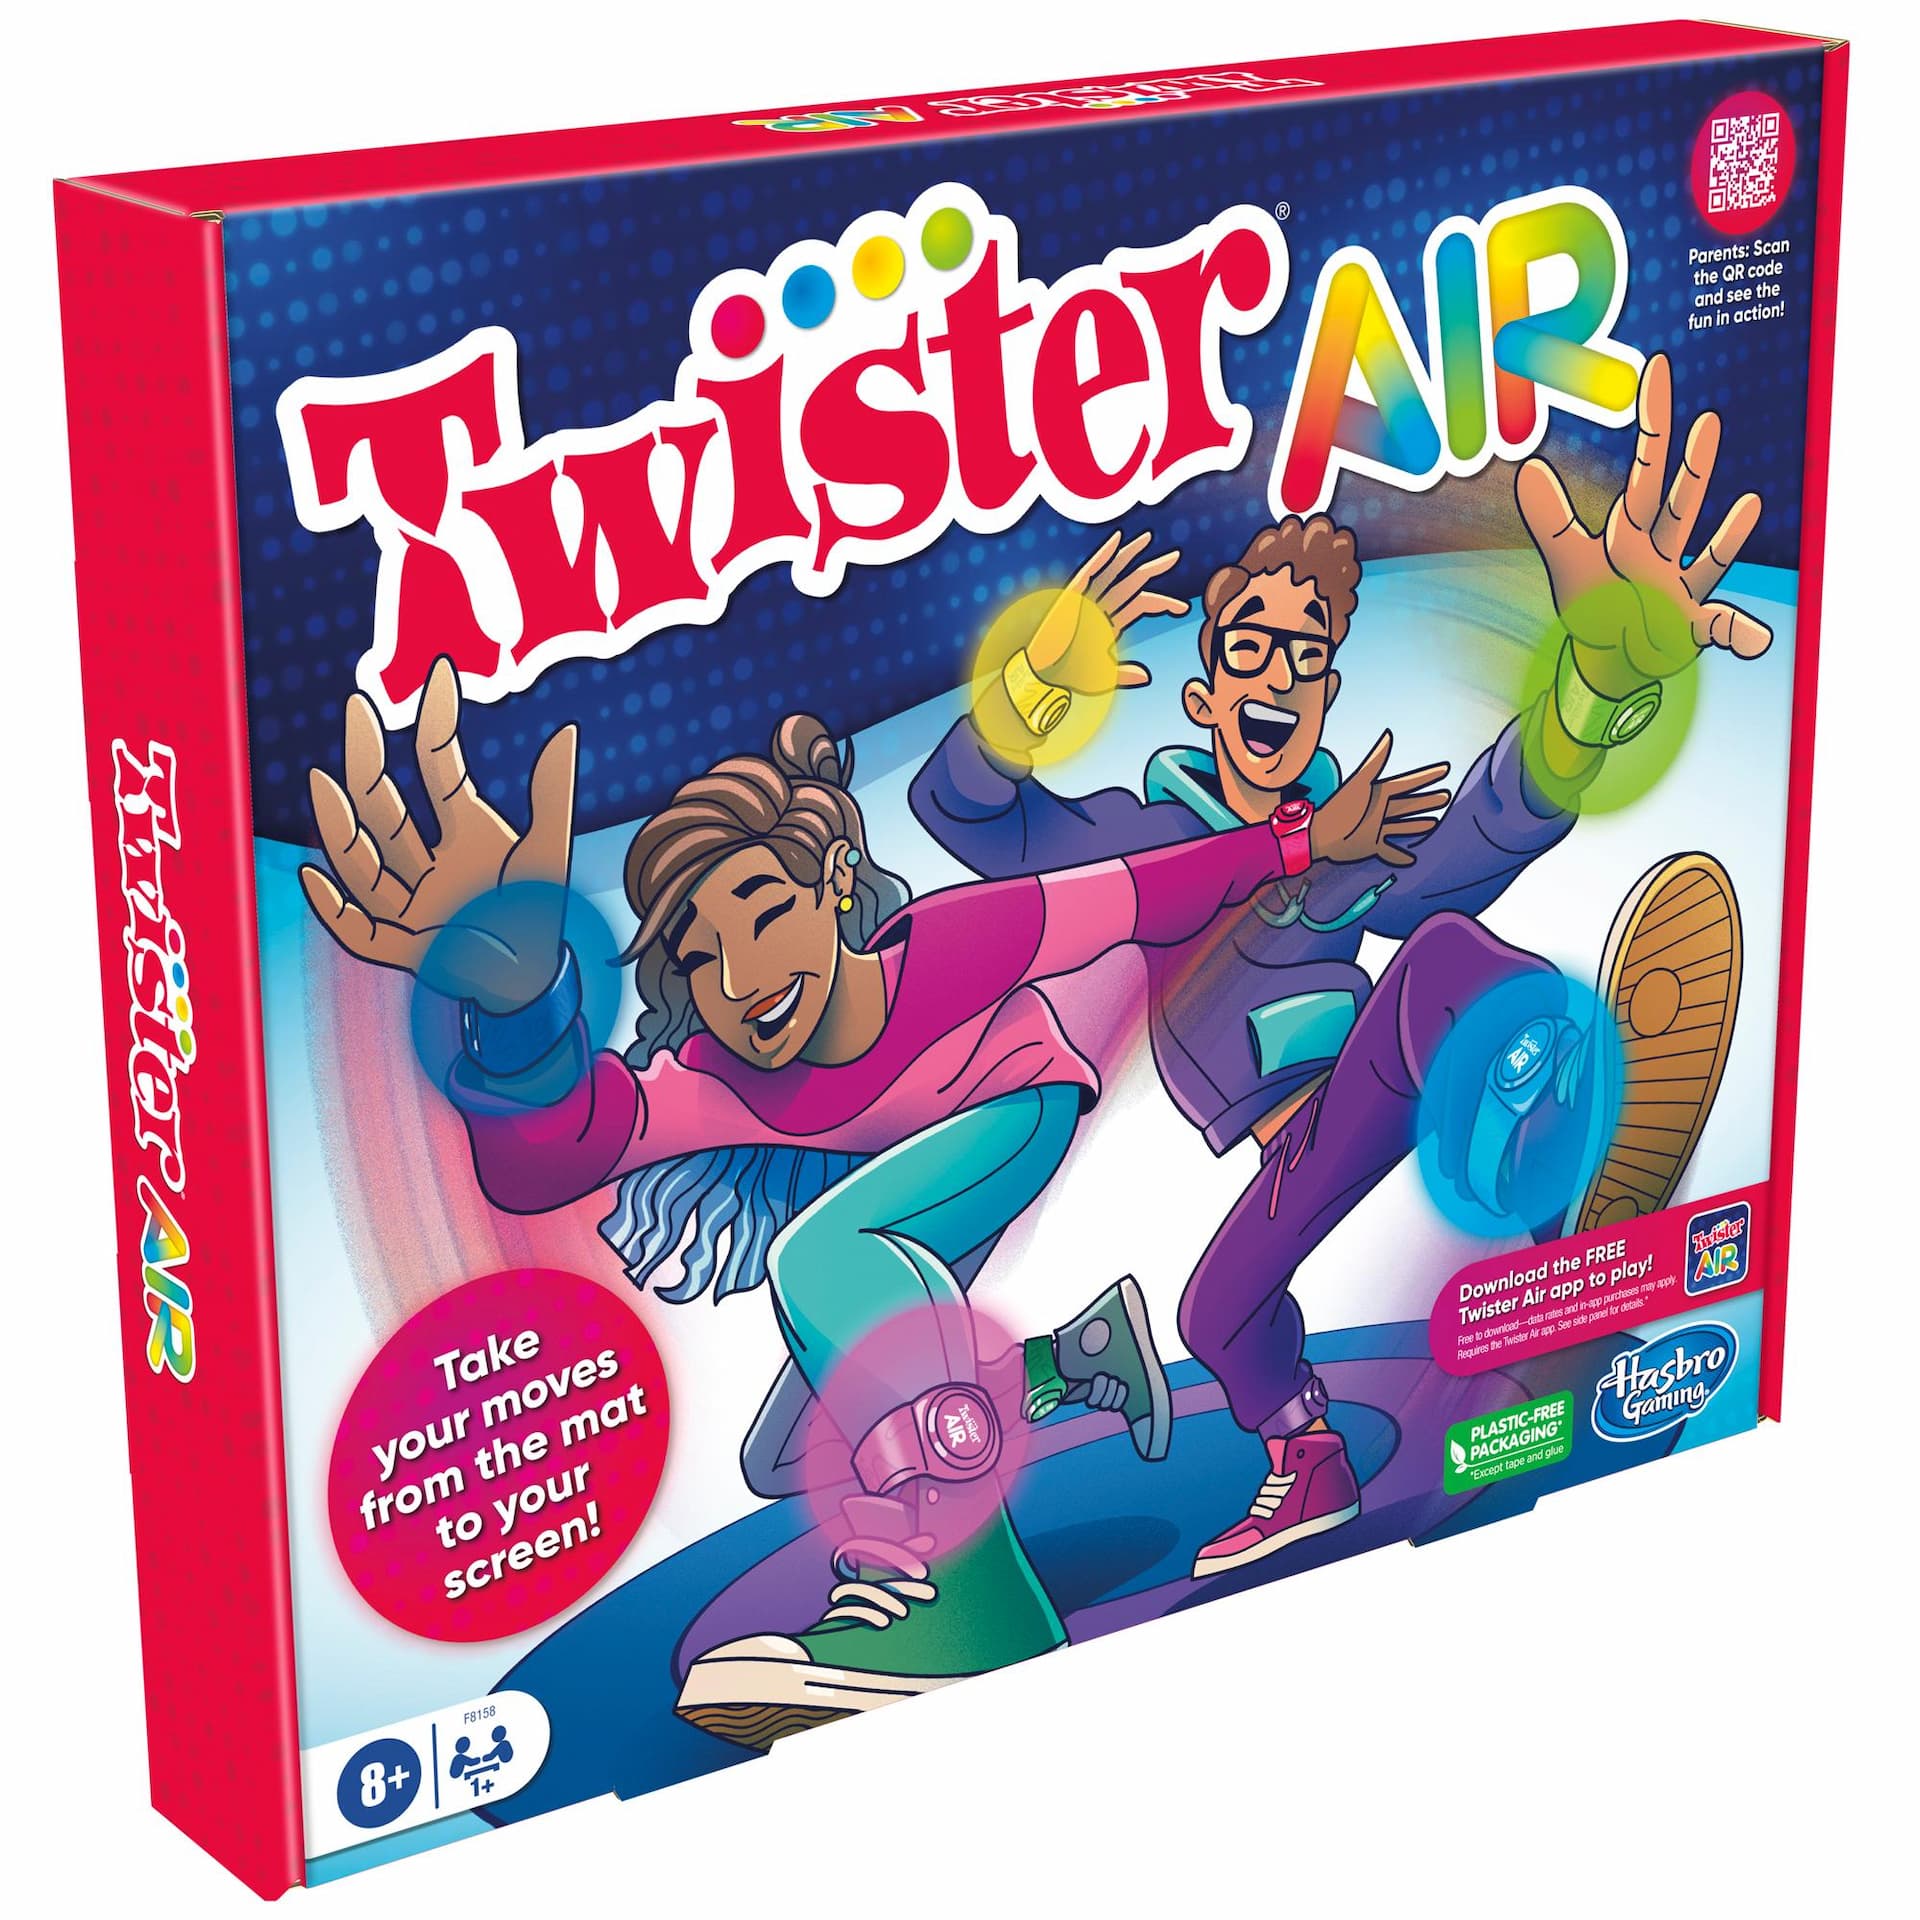 Twister Air Game, AR Twister App Play Game, Links to Smart Devices, Active Games, Ages 8+